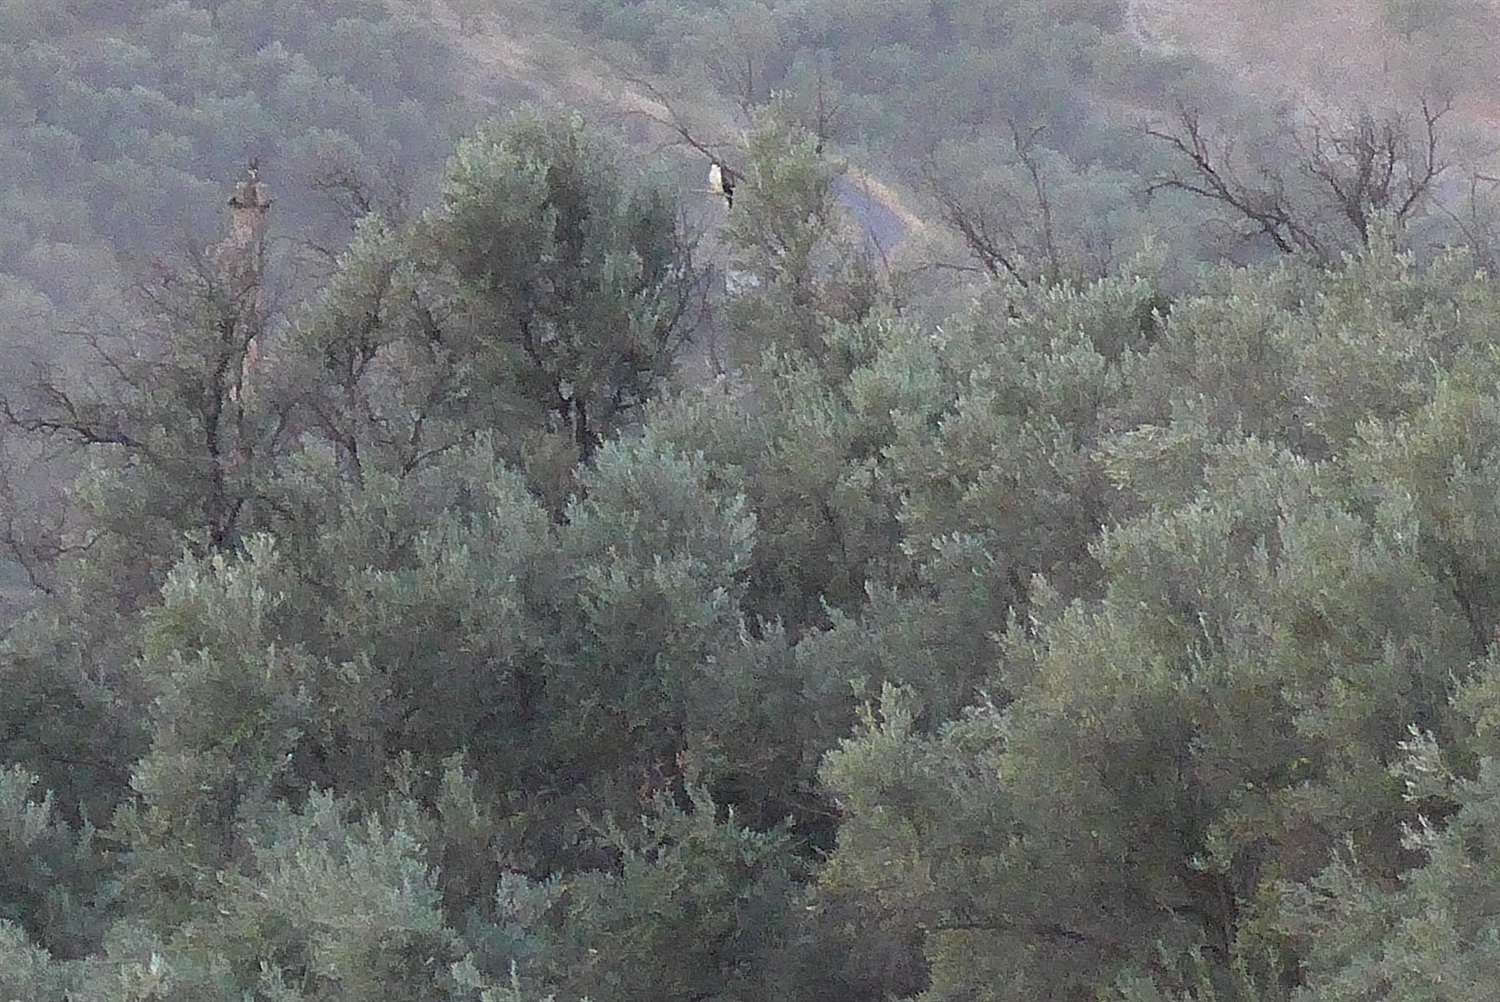 Mr Eagle was having chat to himself in the tree this morning, he had a lot to say